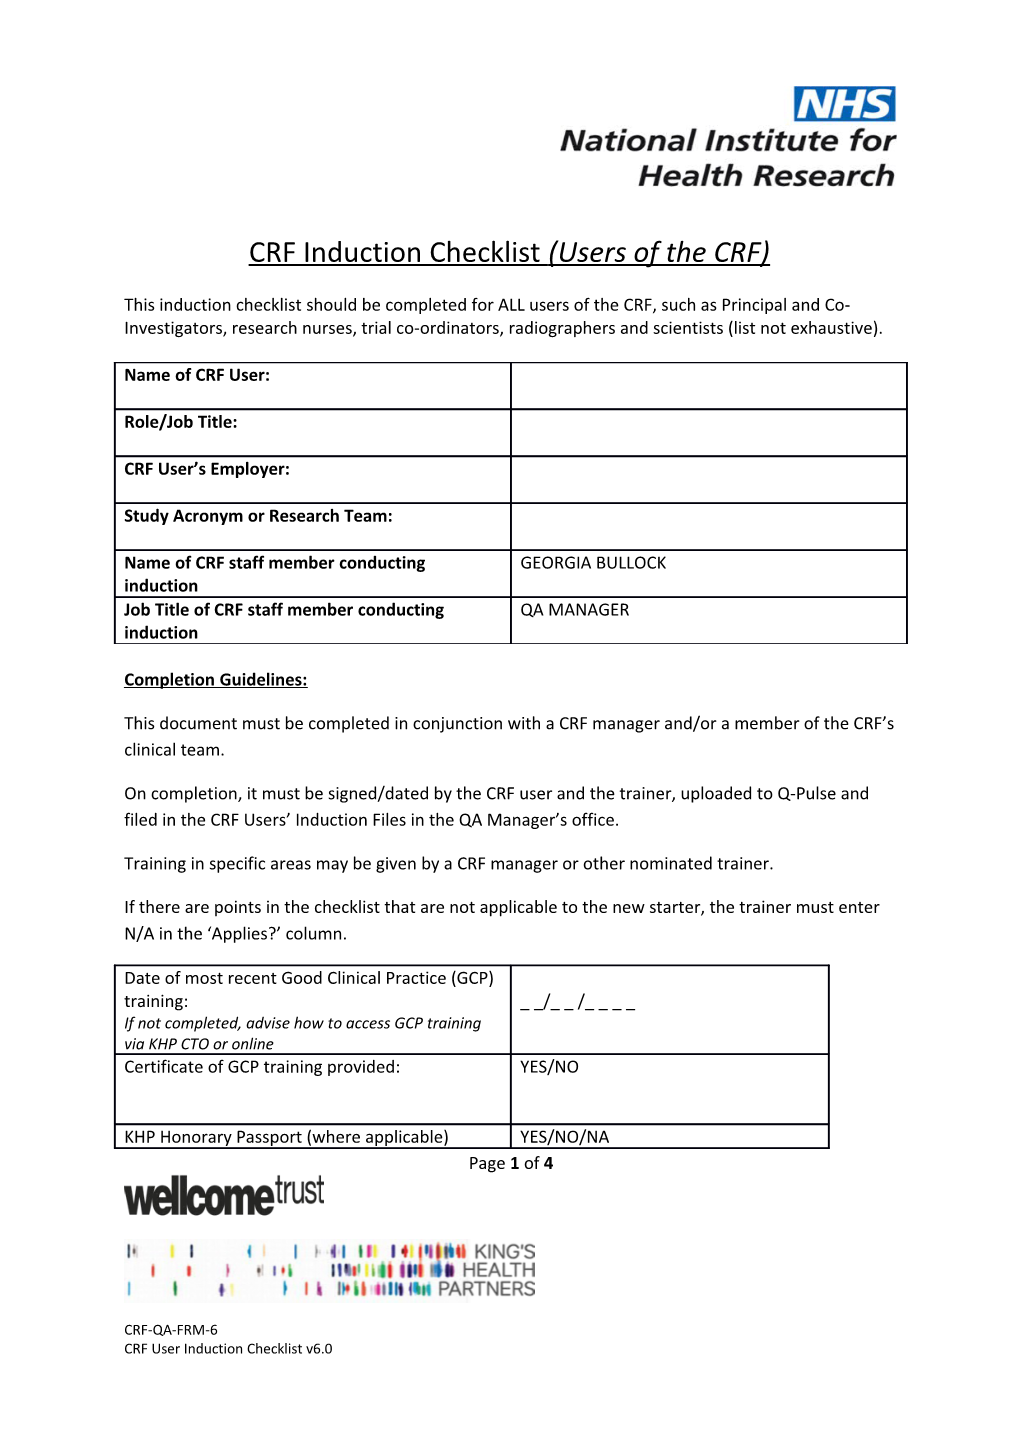 CRF Induction Checklist (Users of the CRF)